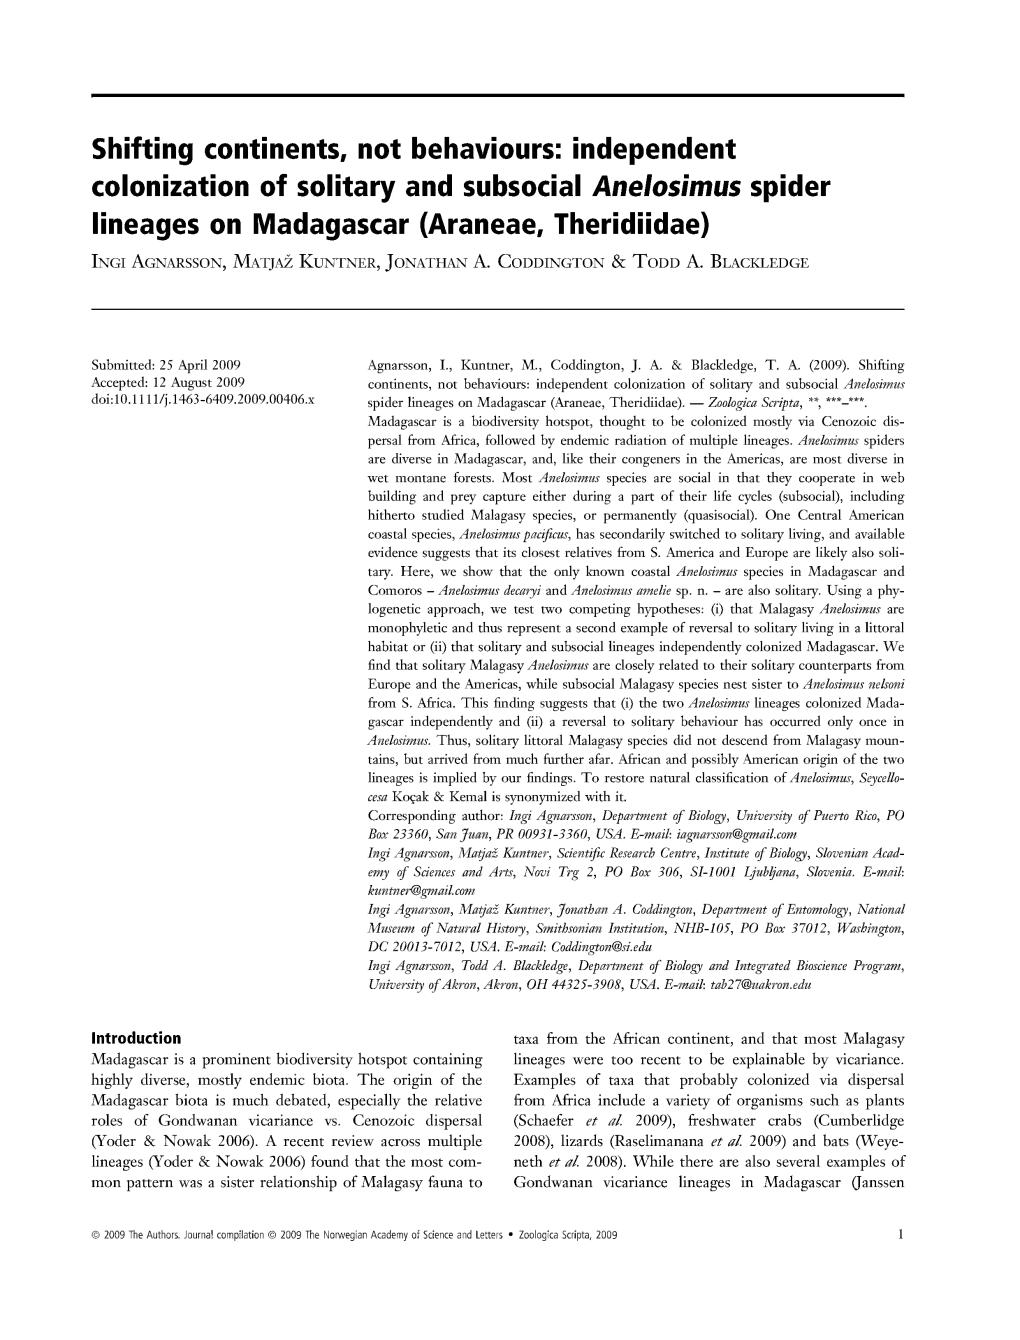 Independent Colonization of Solitary and Subsocial Anelosimus Spider Lineages on Madagascar (Araneae, Theridiidae) INGI AGNARSSON, MATJAZ KUNTNER, JONATHAN A